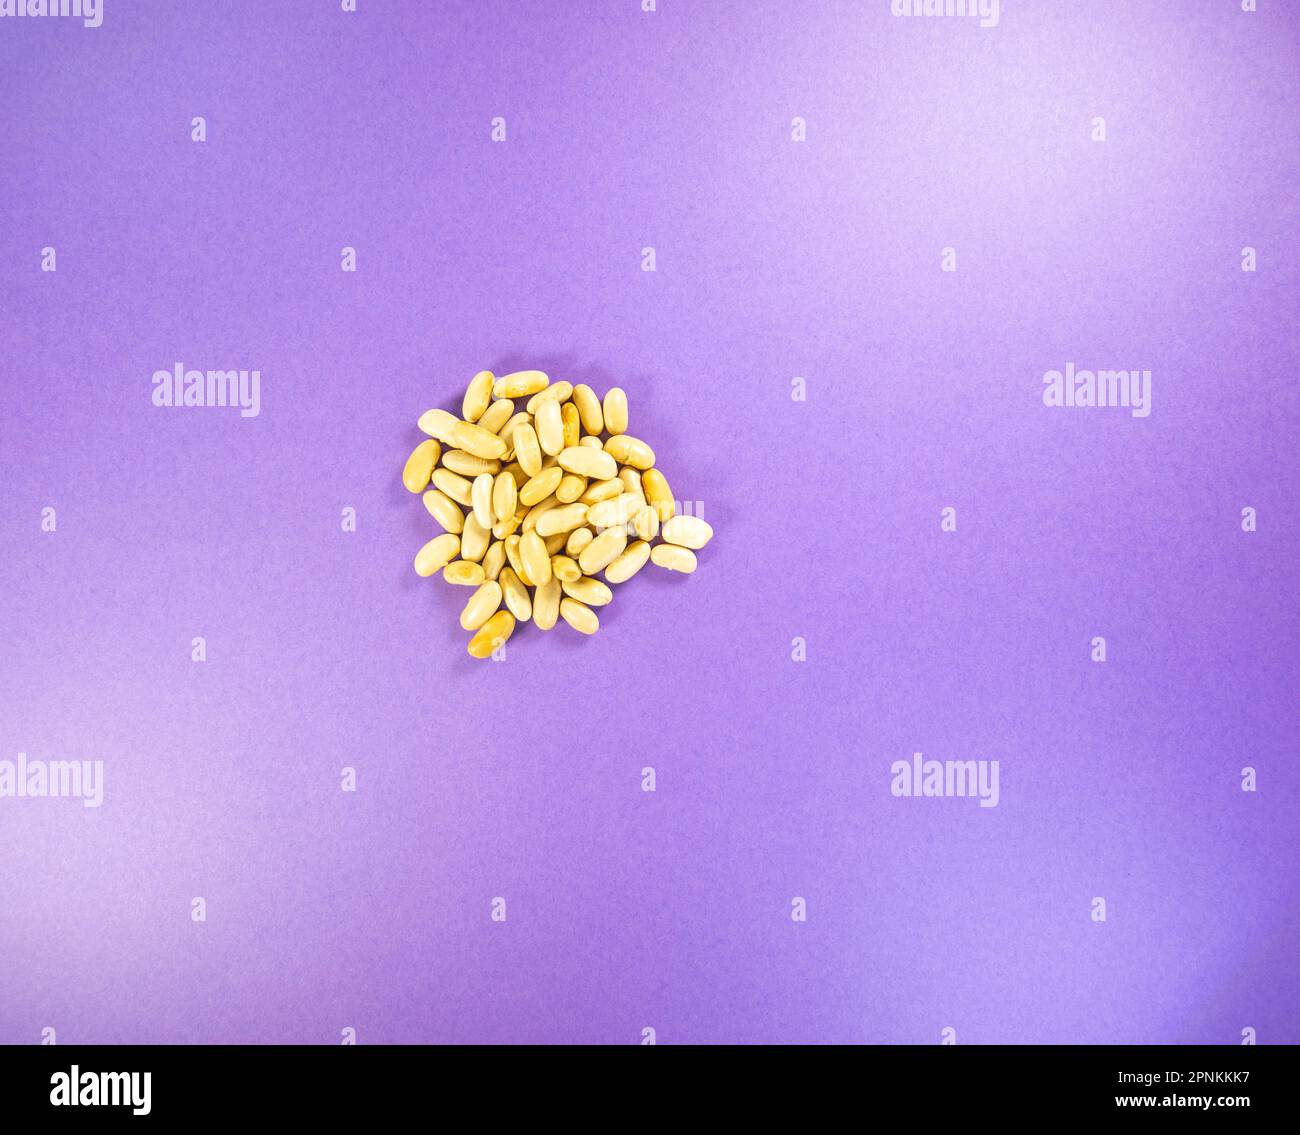 small heap of used (for blind baking) navy bean, haricot, pearl haricot bean isolated on a purple background Stock Photo